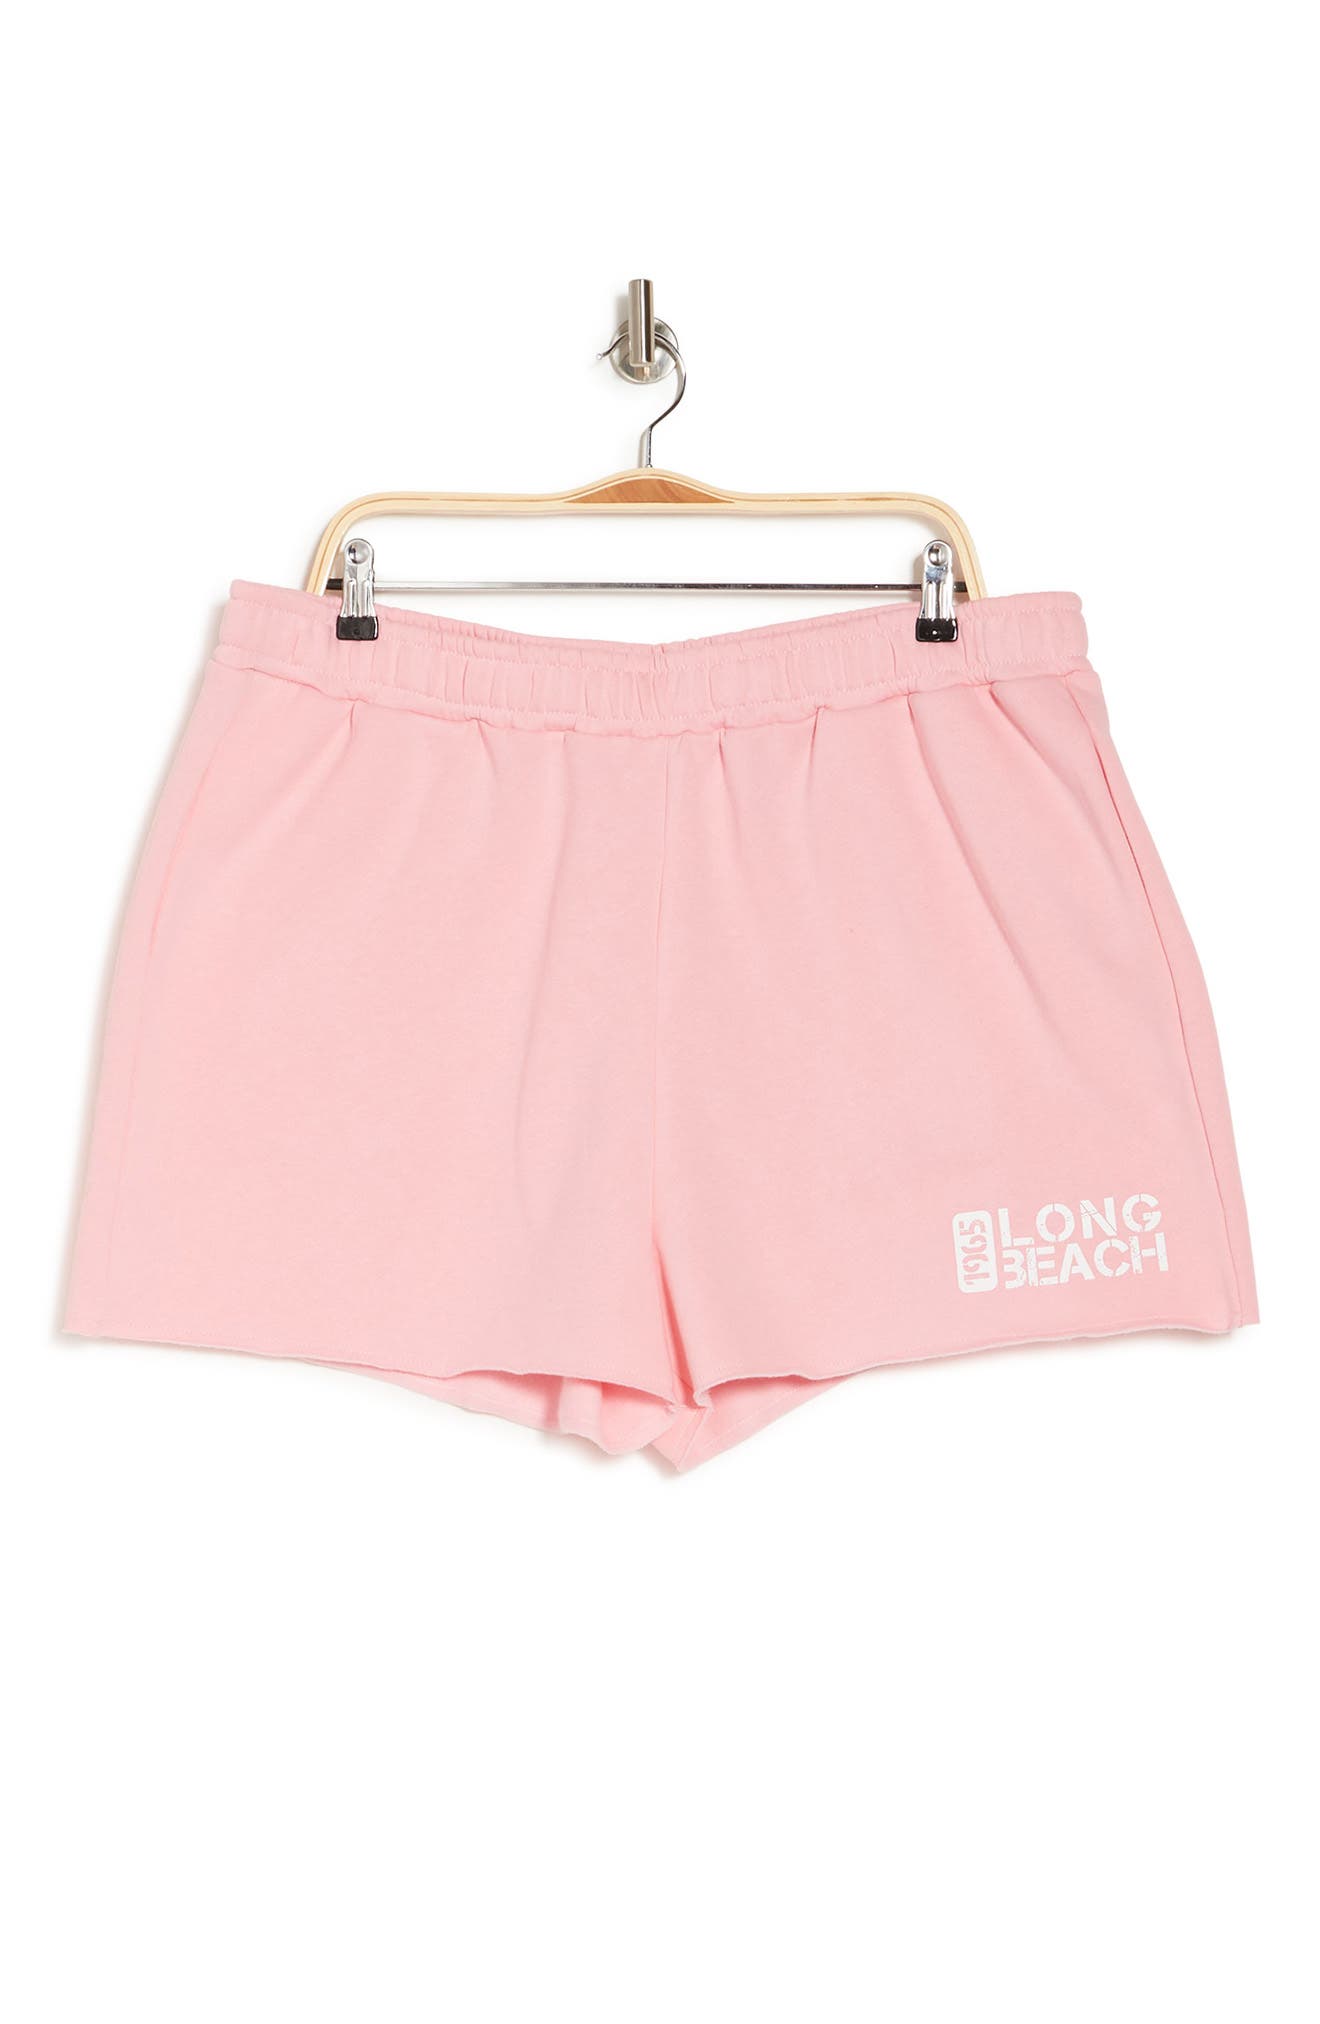 Abound Graphic Print Knit Shorts In Pink Candy Long Beach